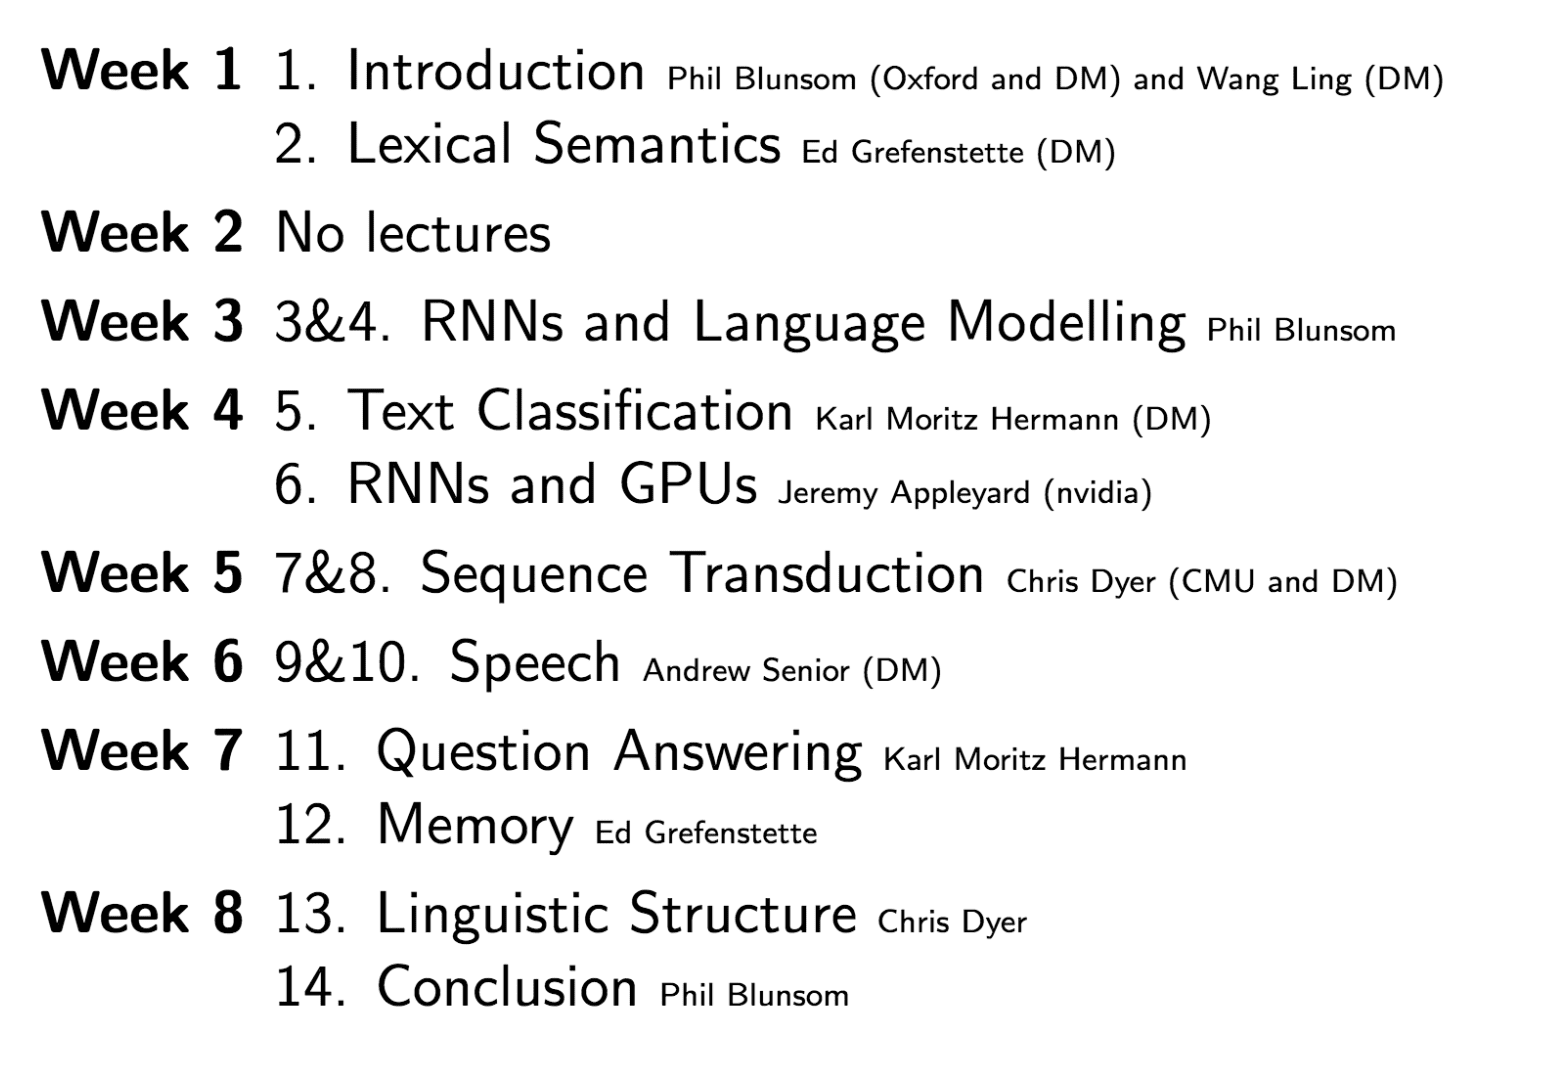 Deep Learning for Natural Language Processing at Oxford Lecture Breakdown